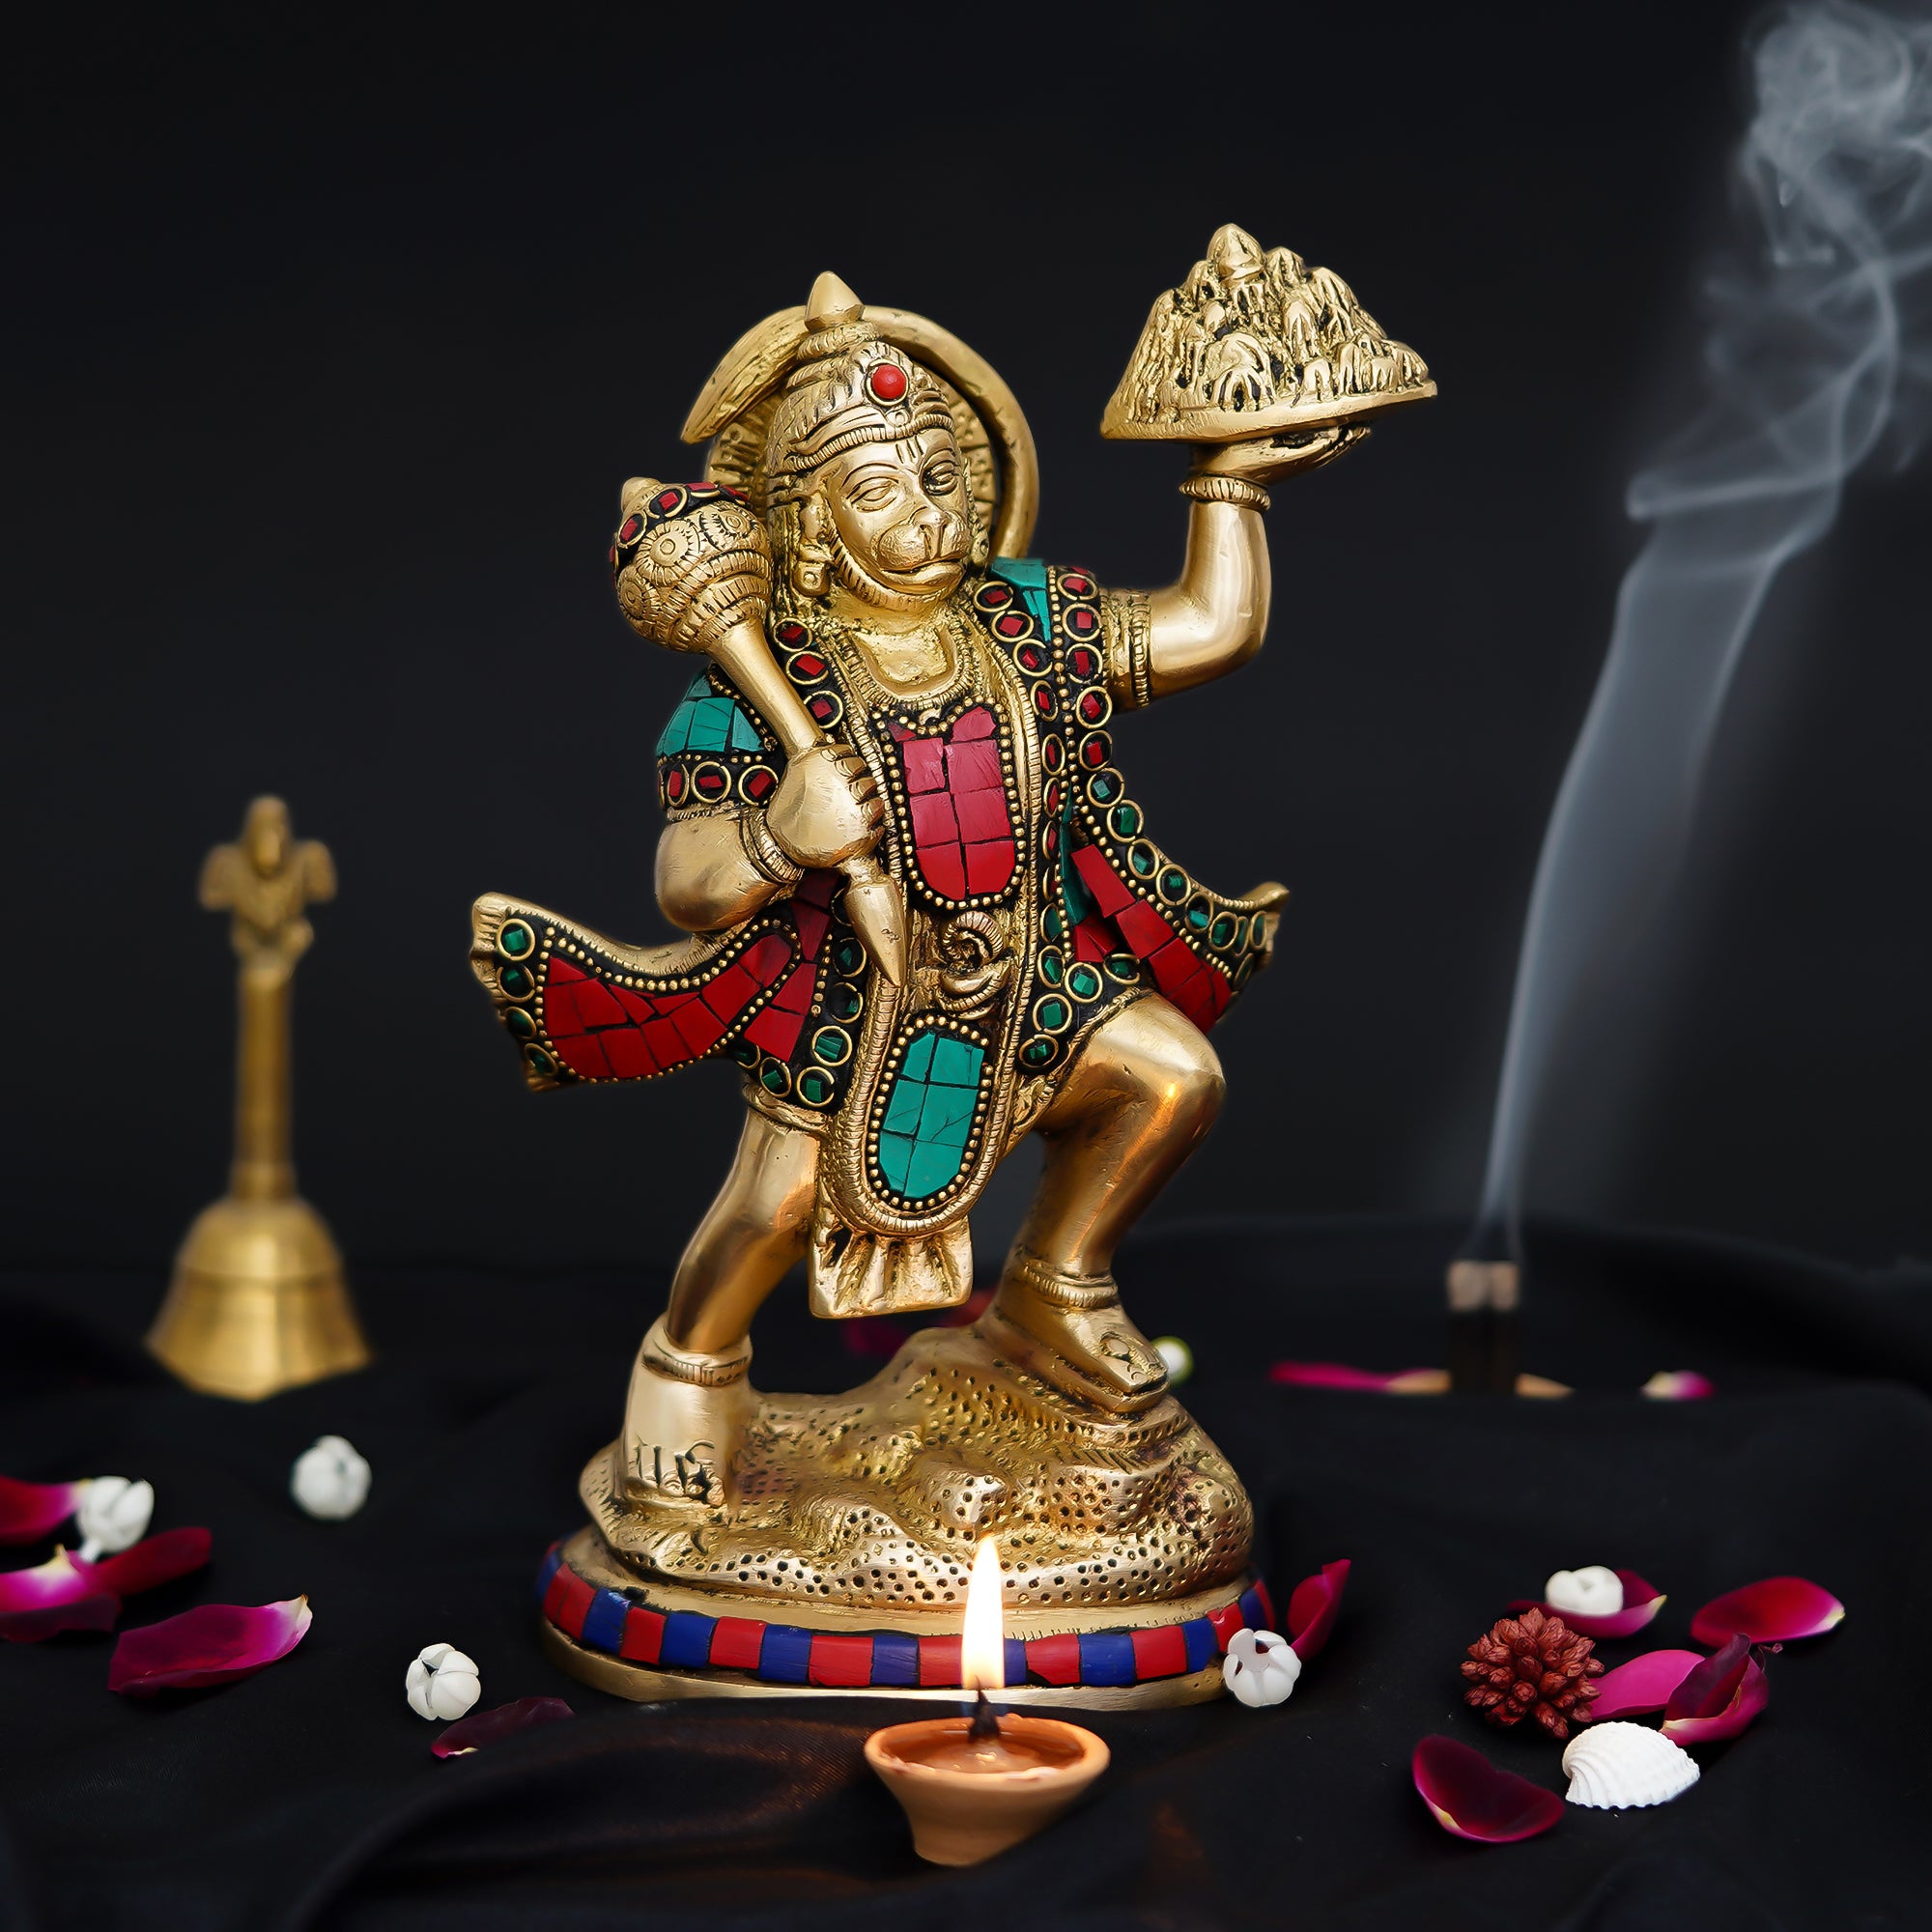 Colorful Stone Work Handcrafted Brass Lord Hanuman Statue Carrying Sanjeevani Mountain 1